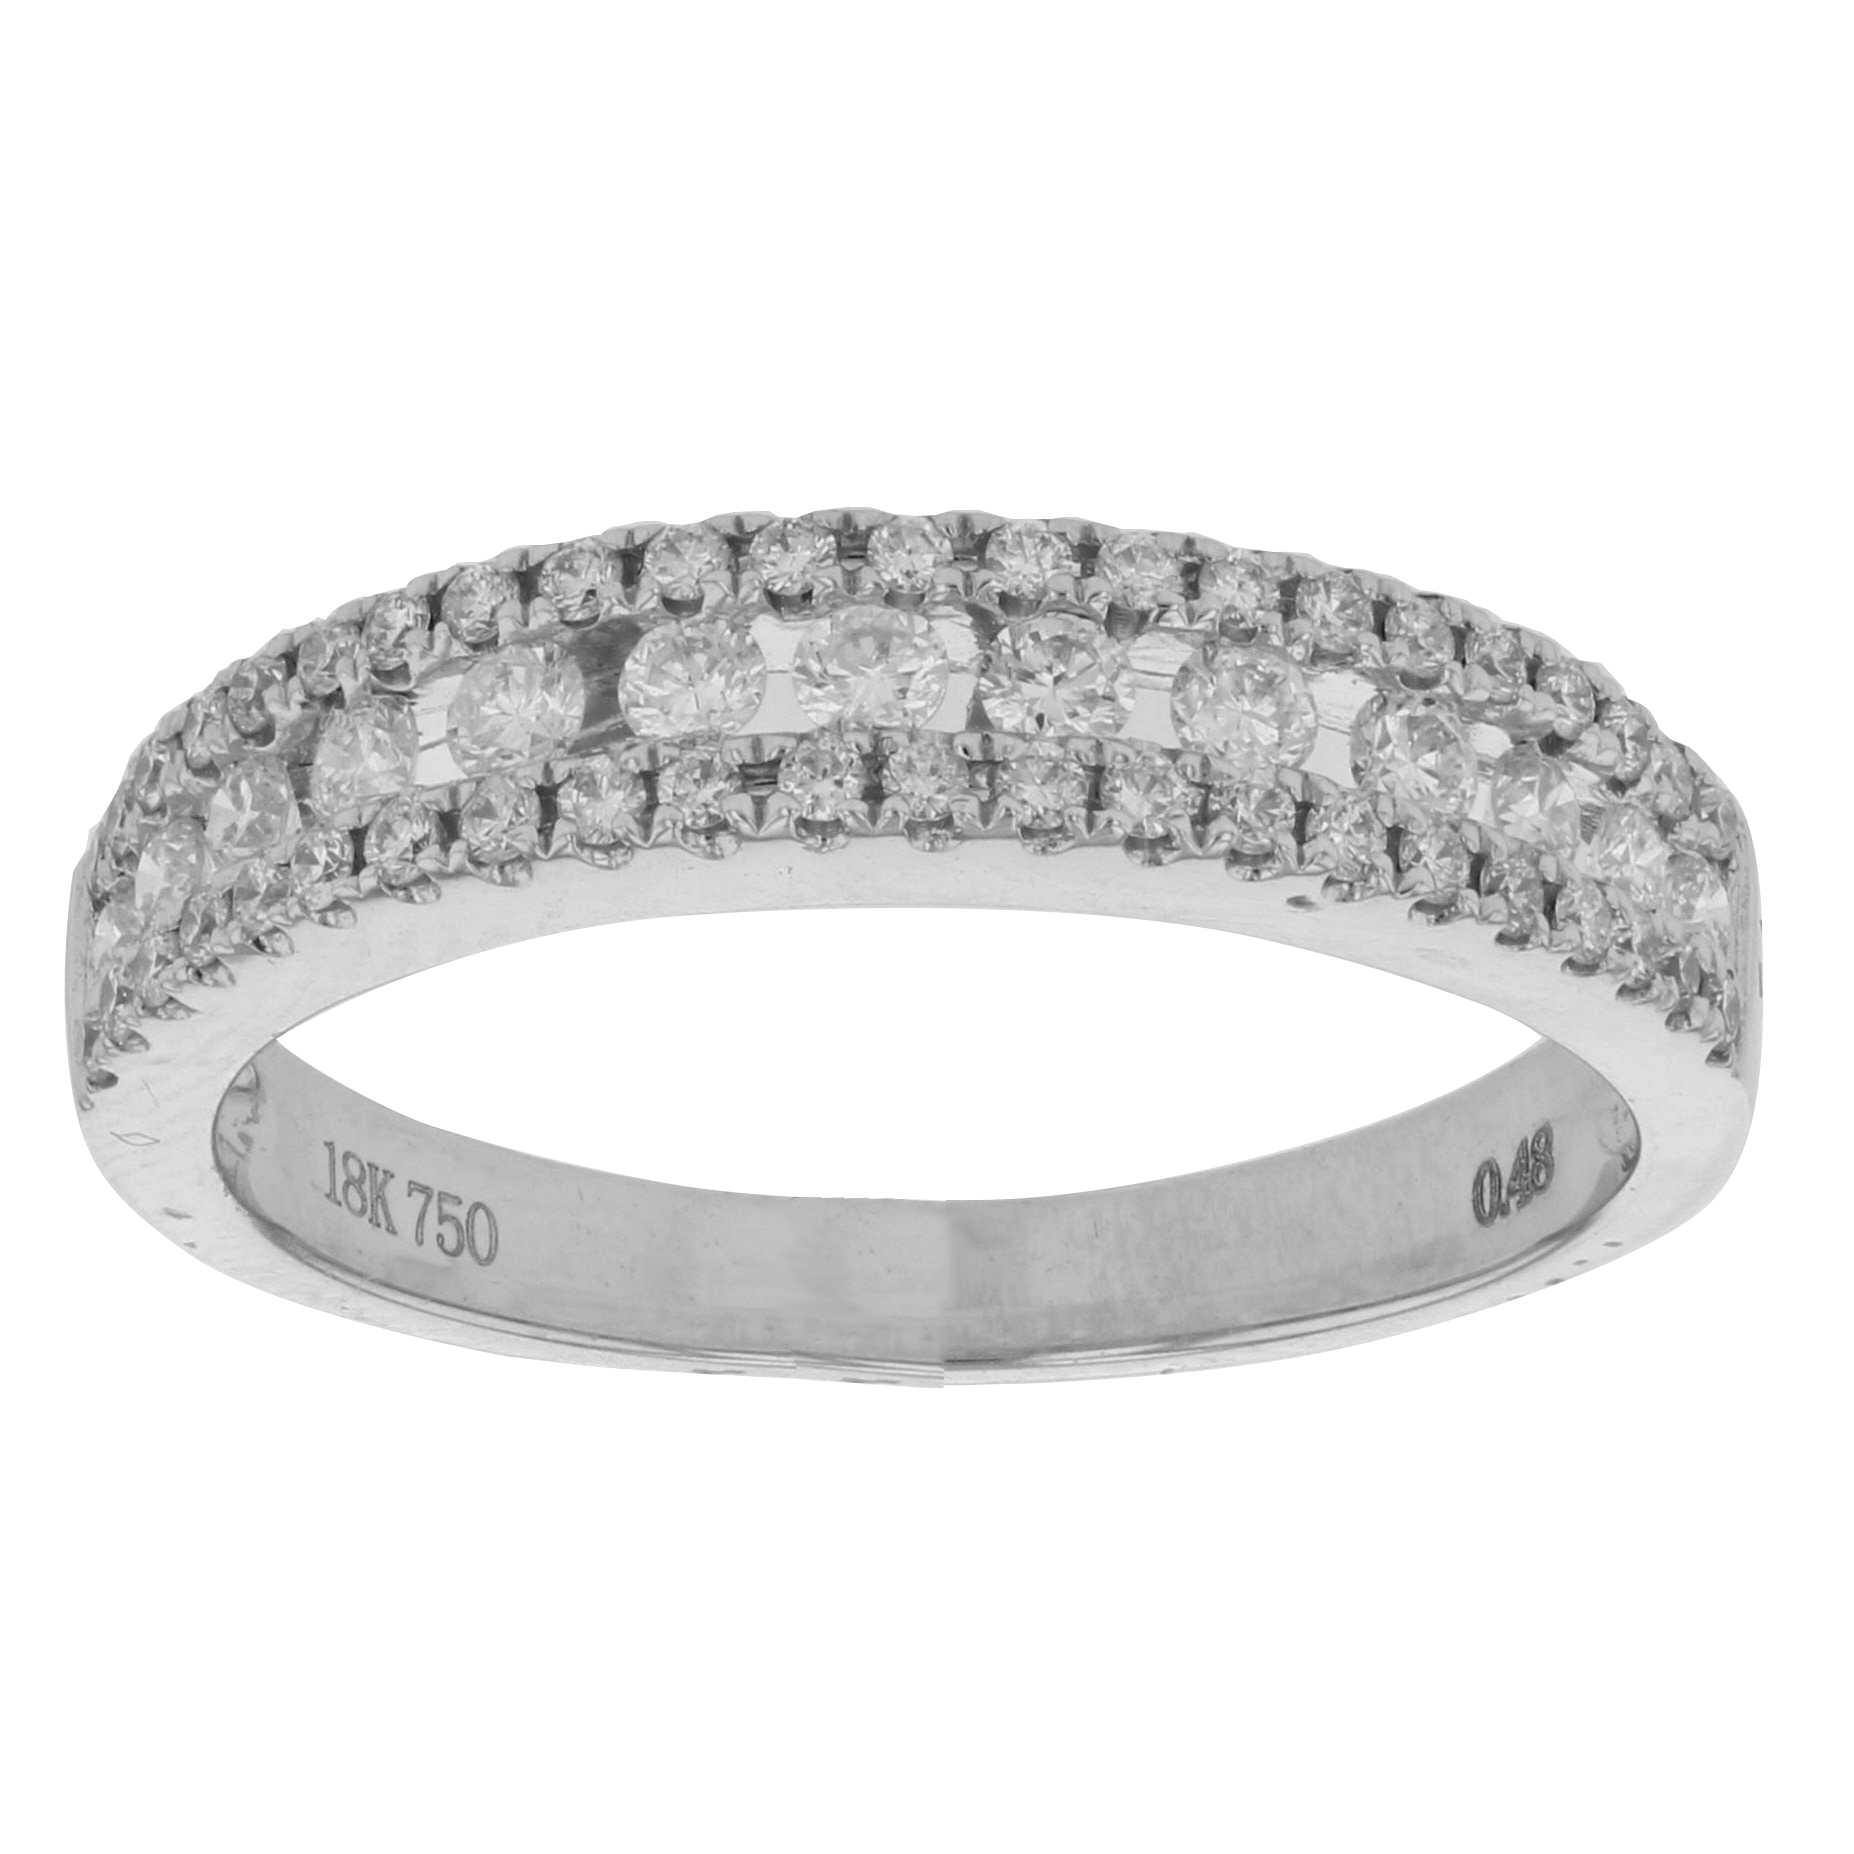 View 0.48ctw Diamond Band in 18k White Gold